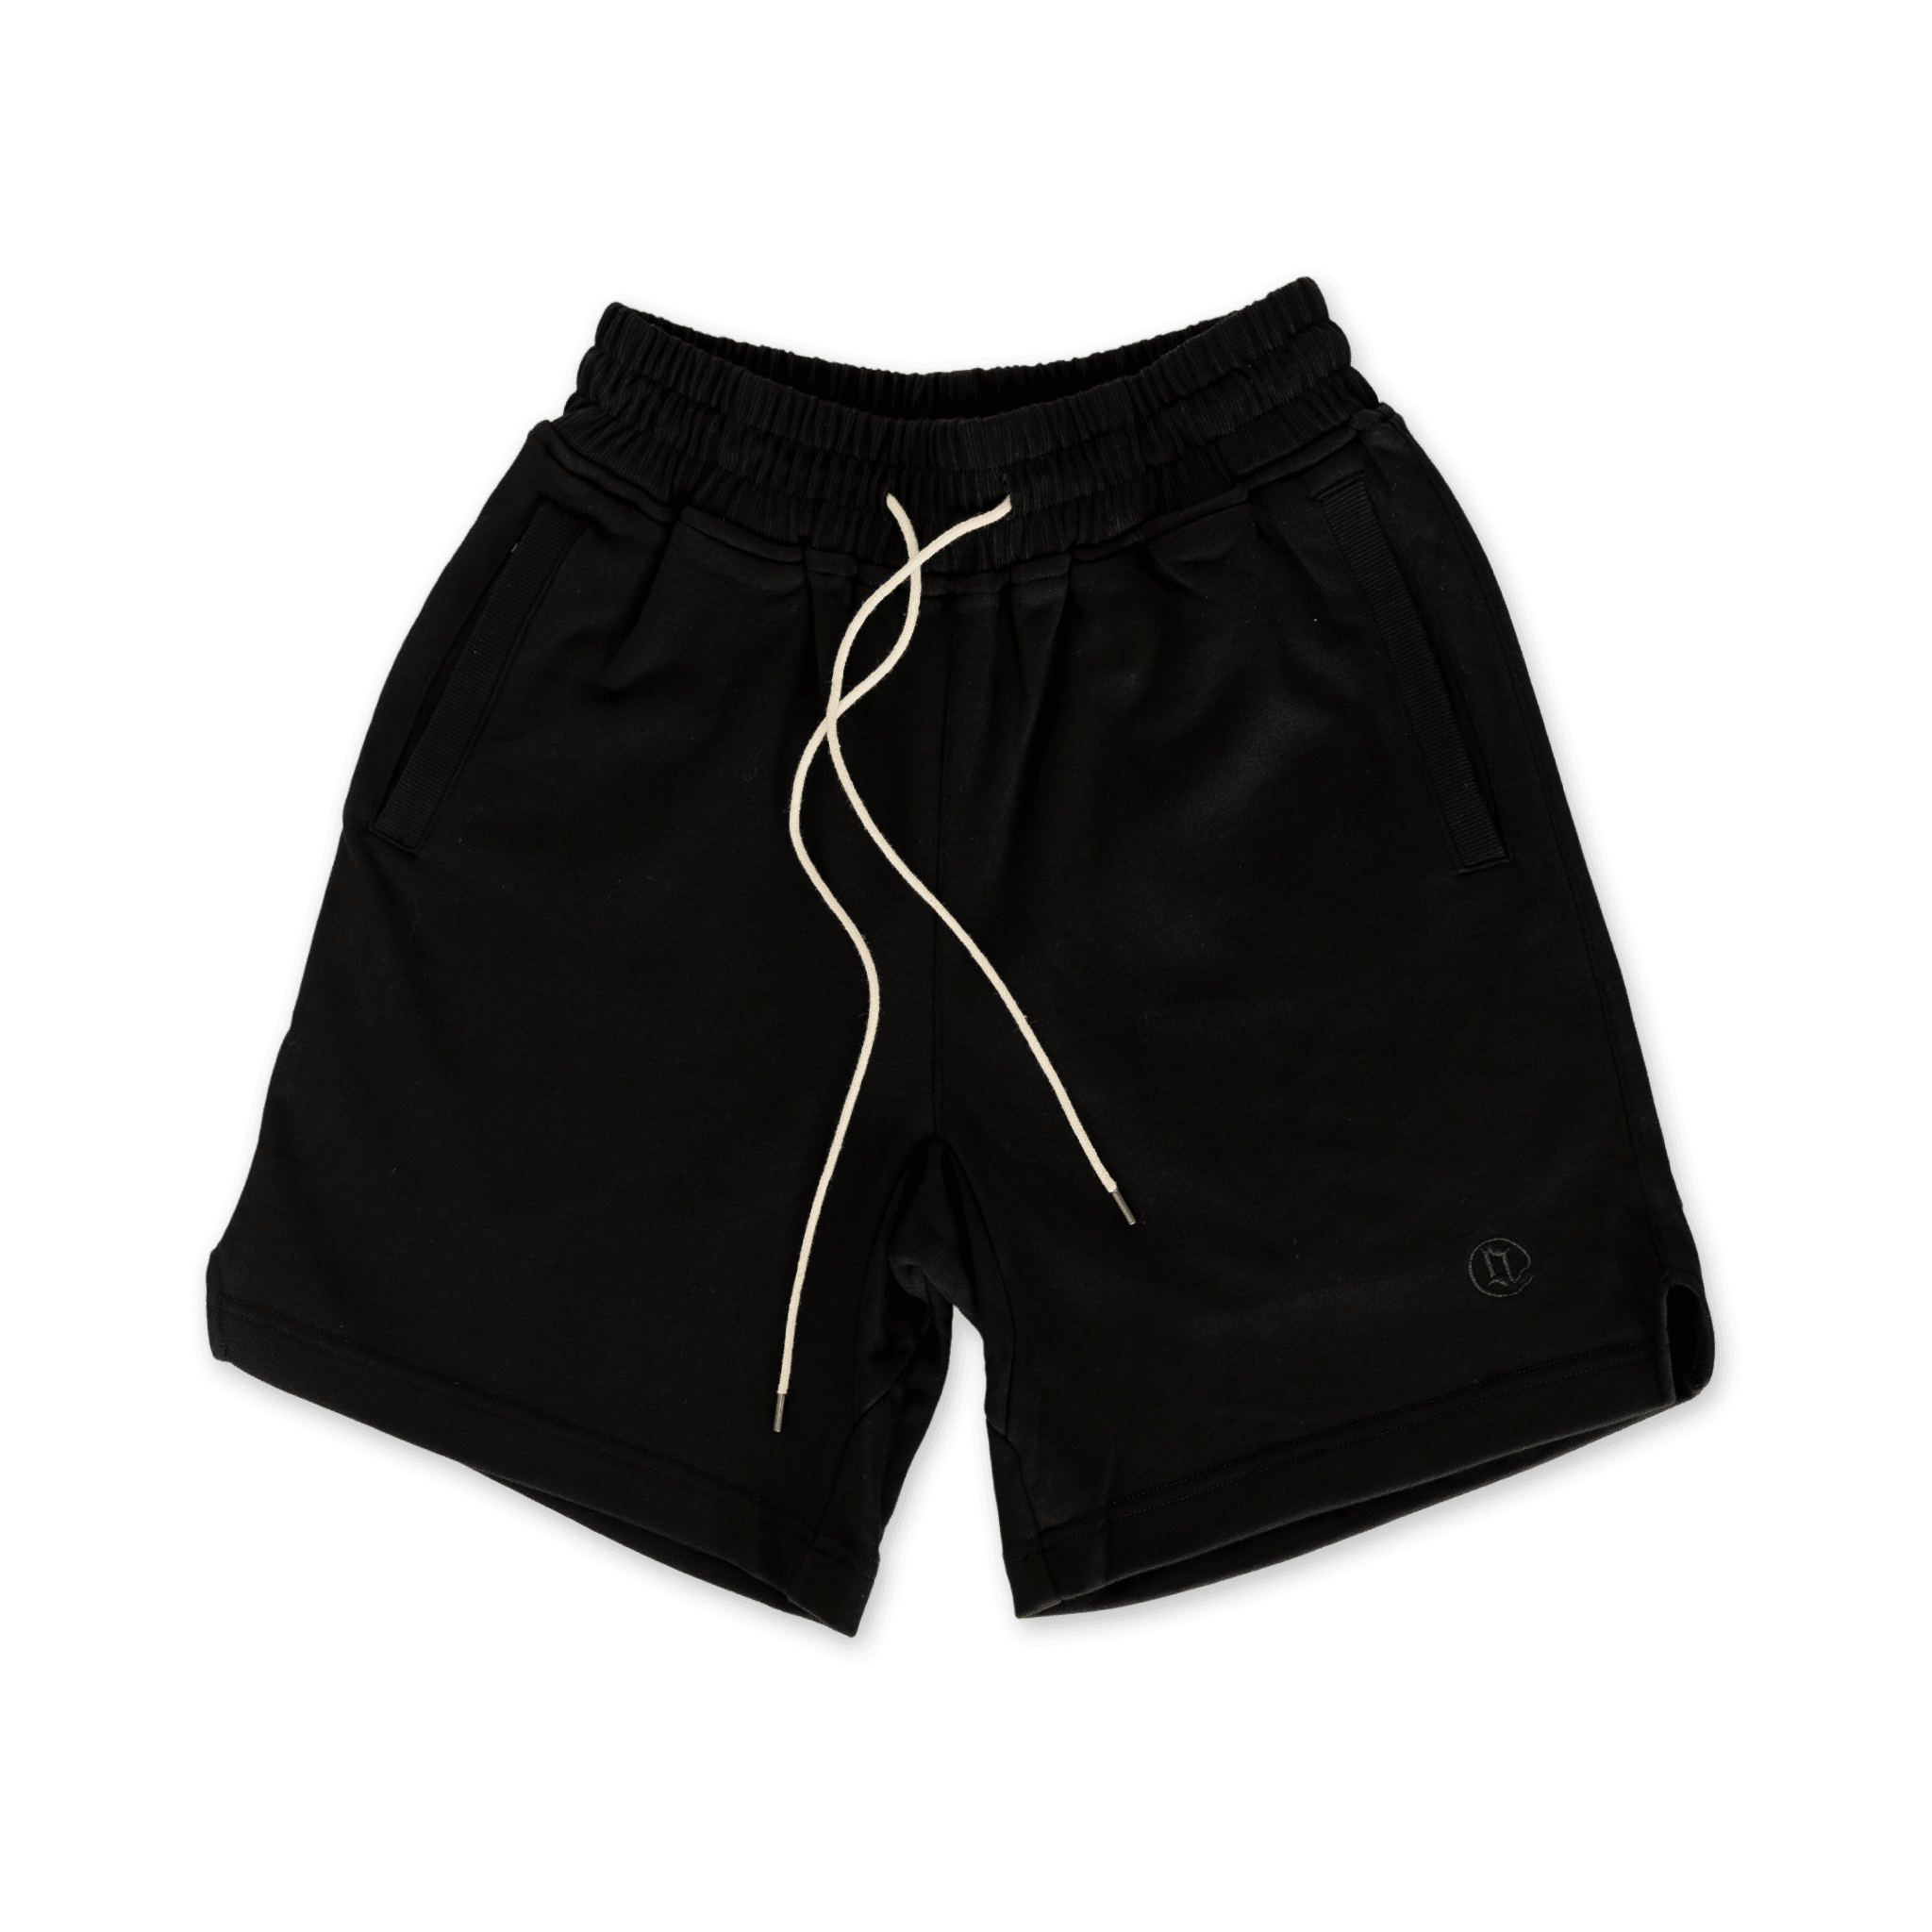 Black @ Shorts - All@Once